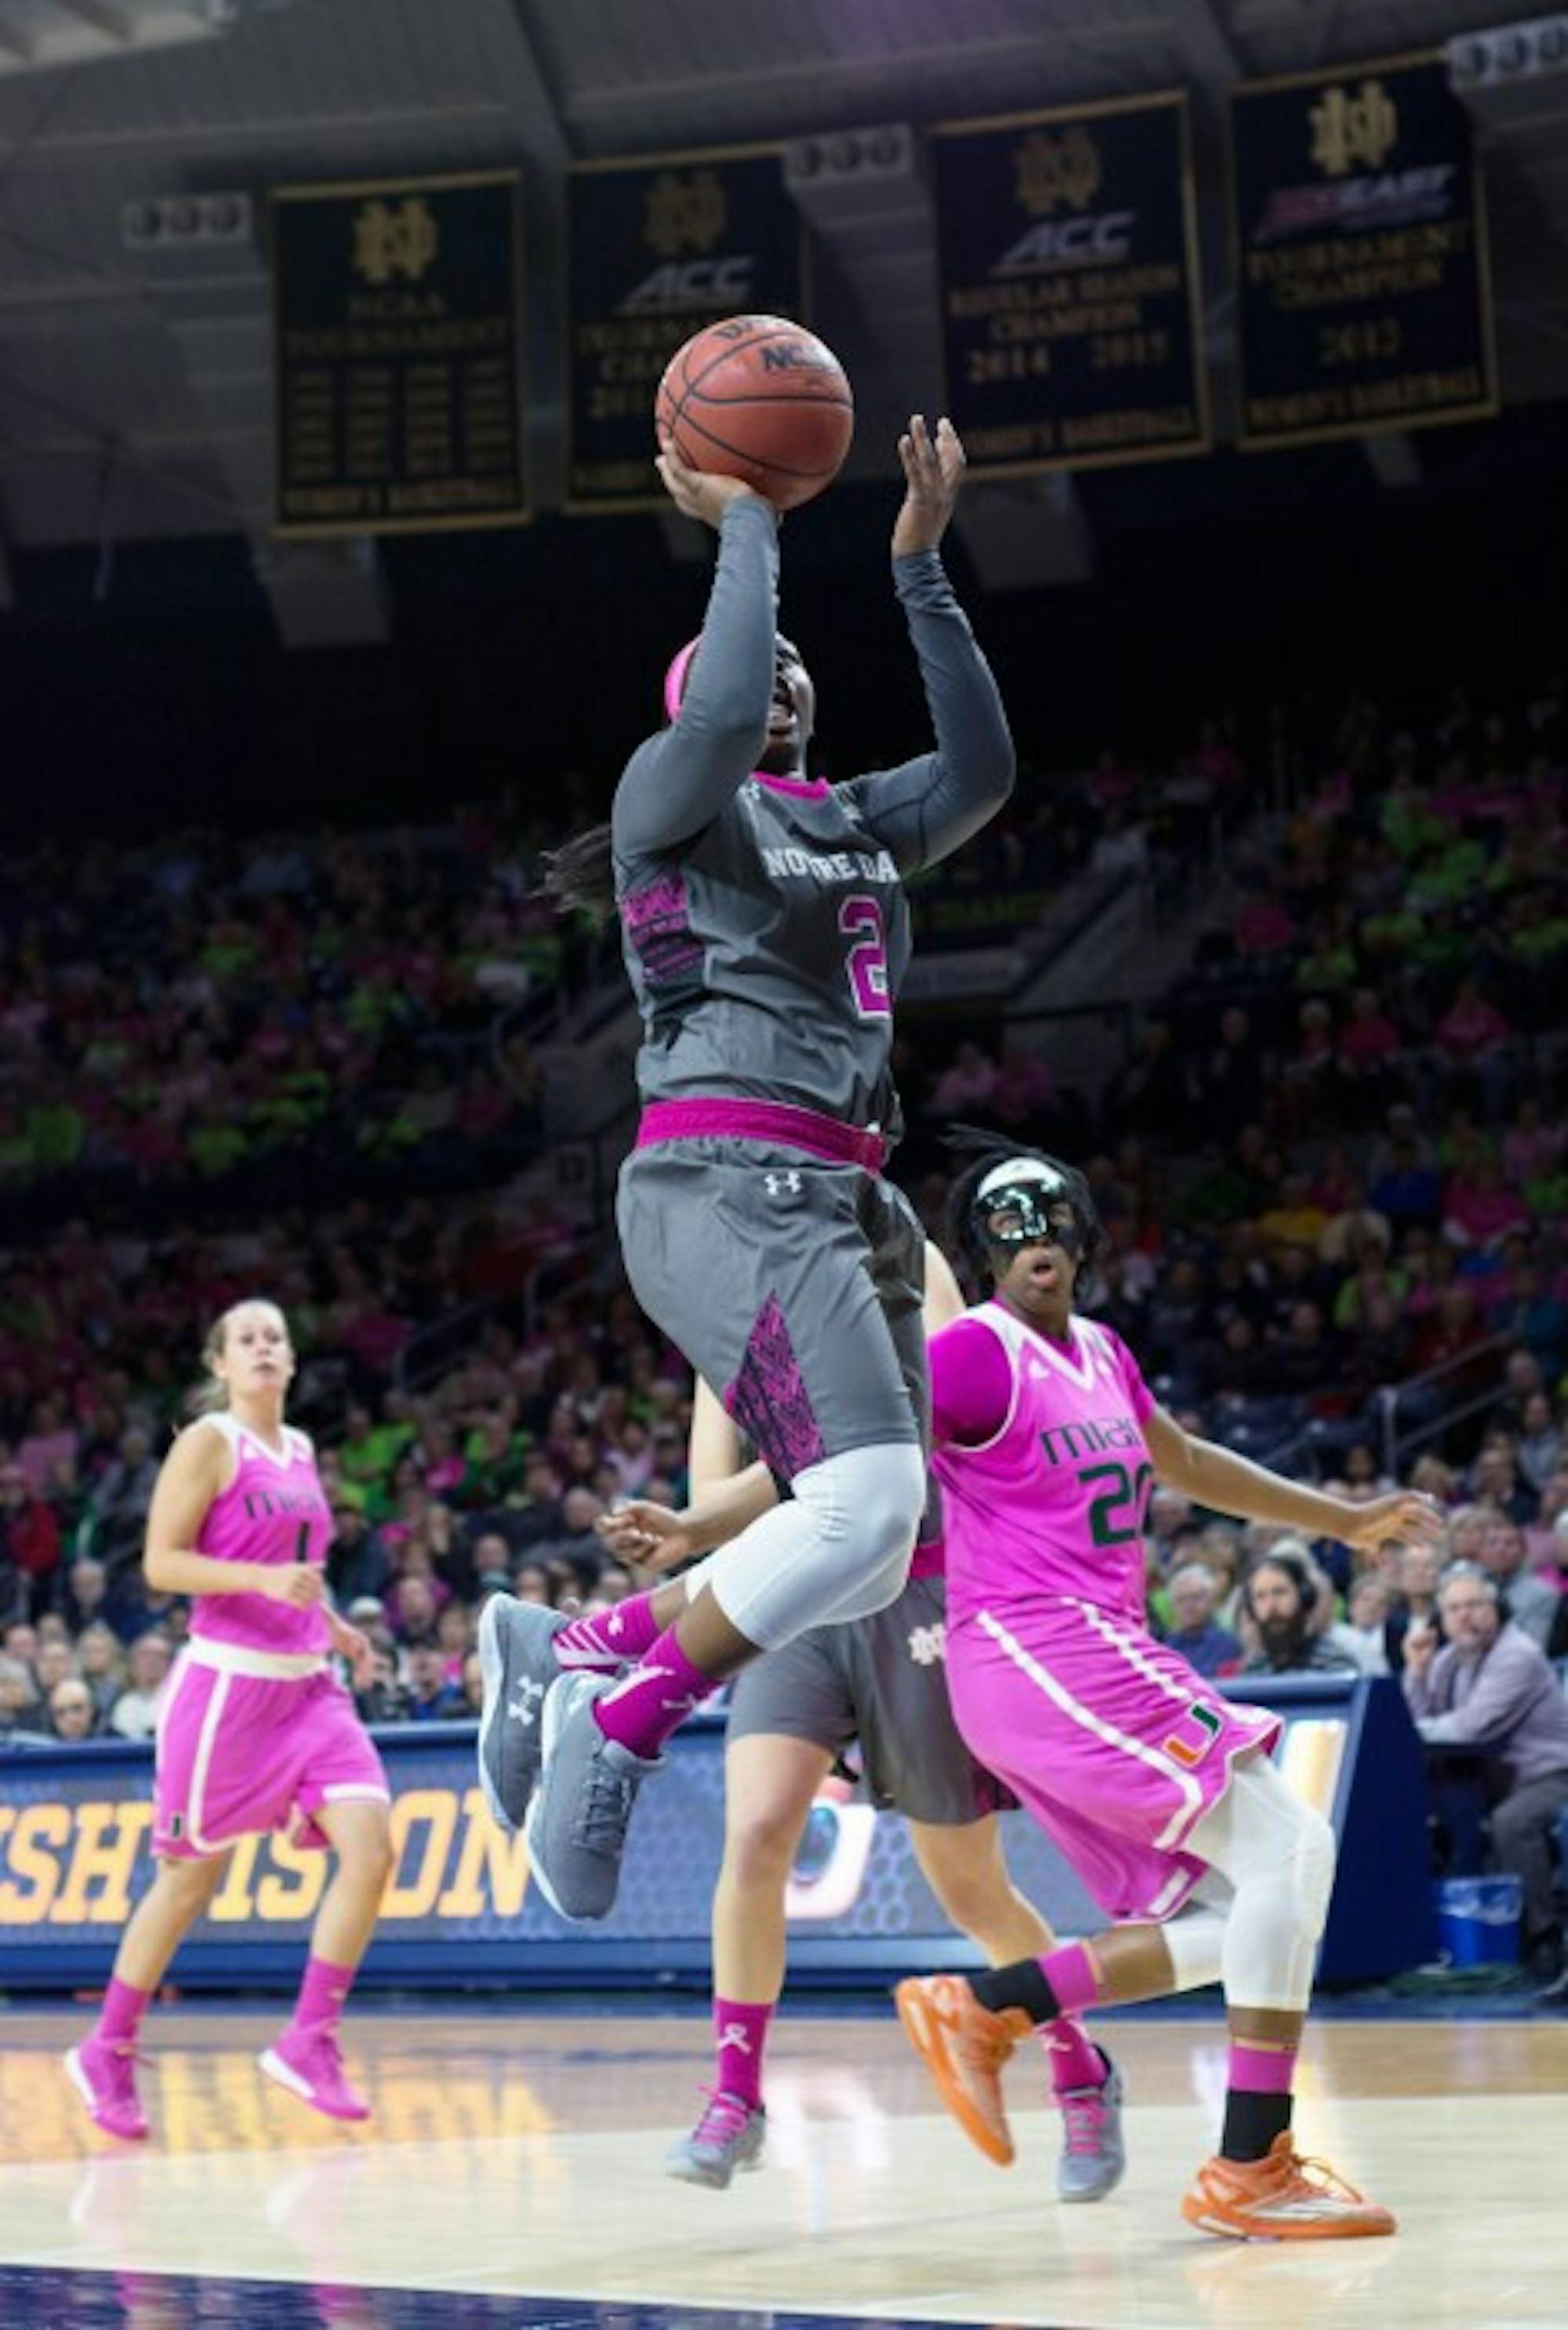 Irish freshman guard Arike Ogunbowale floats a shot while driving the lane during Notre Dame's 90-69 win over Miami (Fla.) on Sunday at Purcell Pavilion.